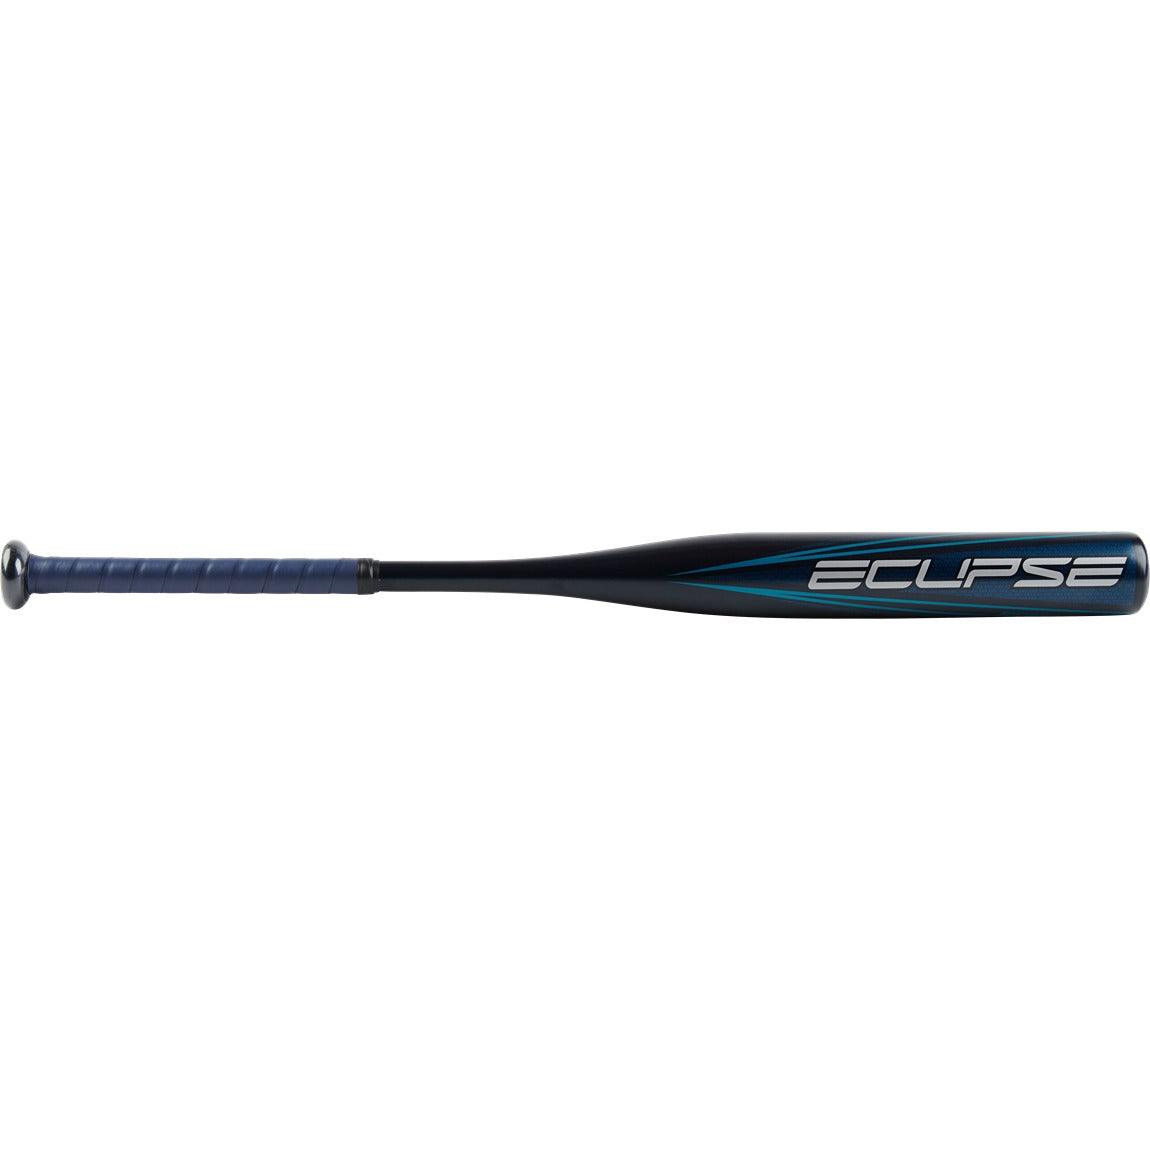 2023 Rawlings Eclipse (-12) Fastpitch Softball Bat - Sports Excellence